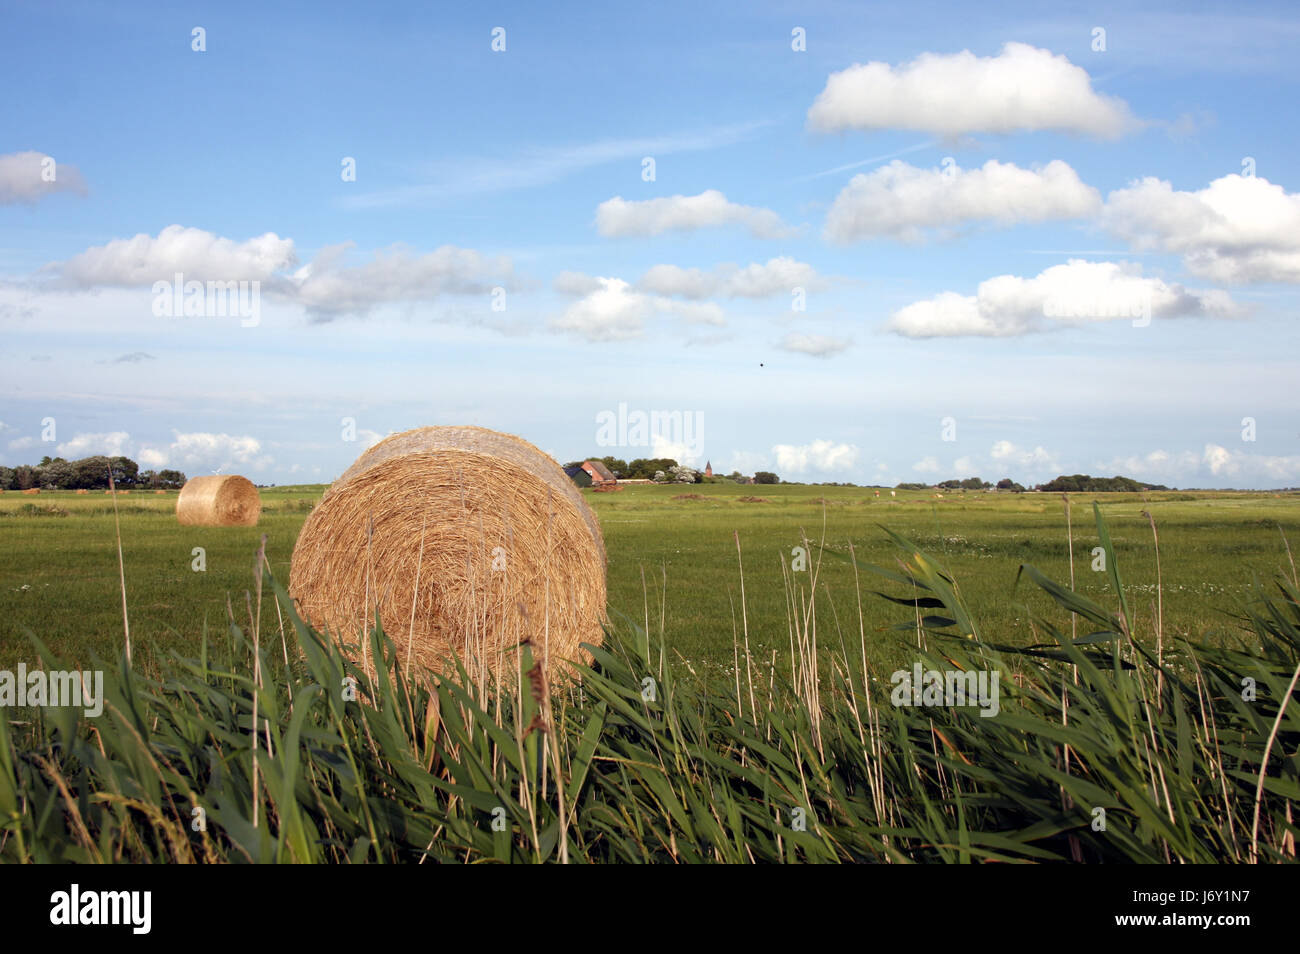 agriculture farming field reed hay-clench hay firmament sky community village Stock Photo